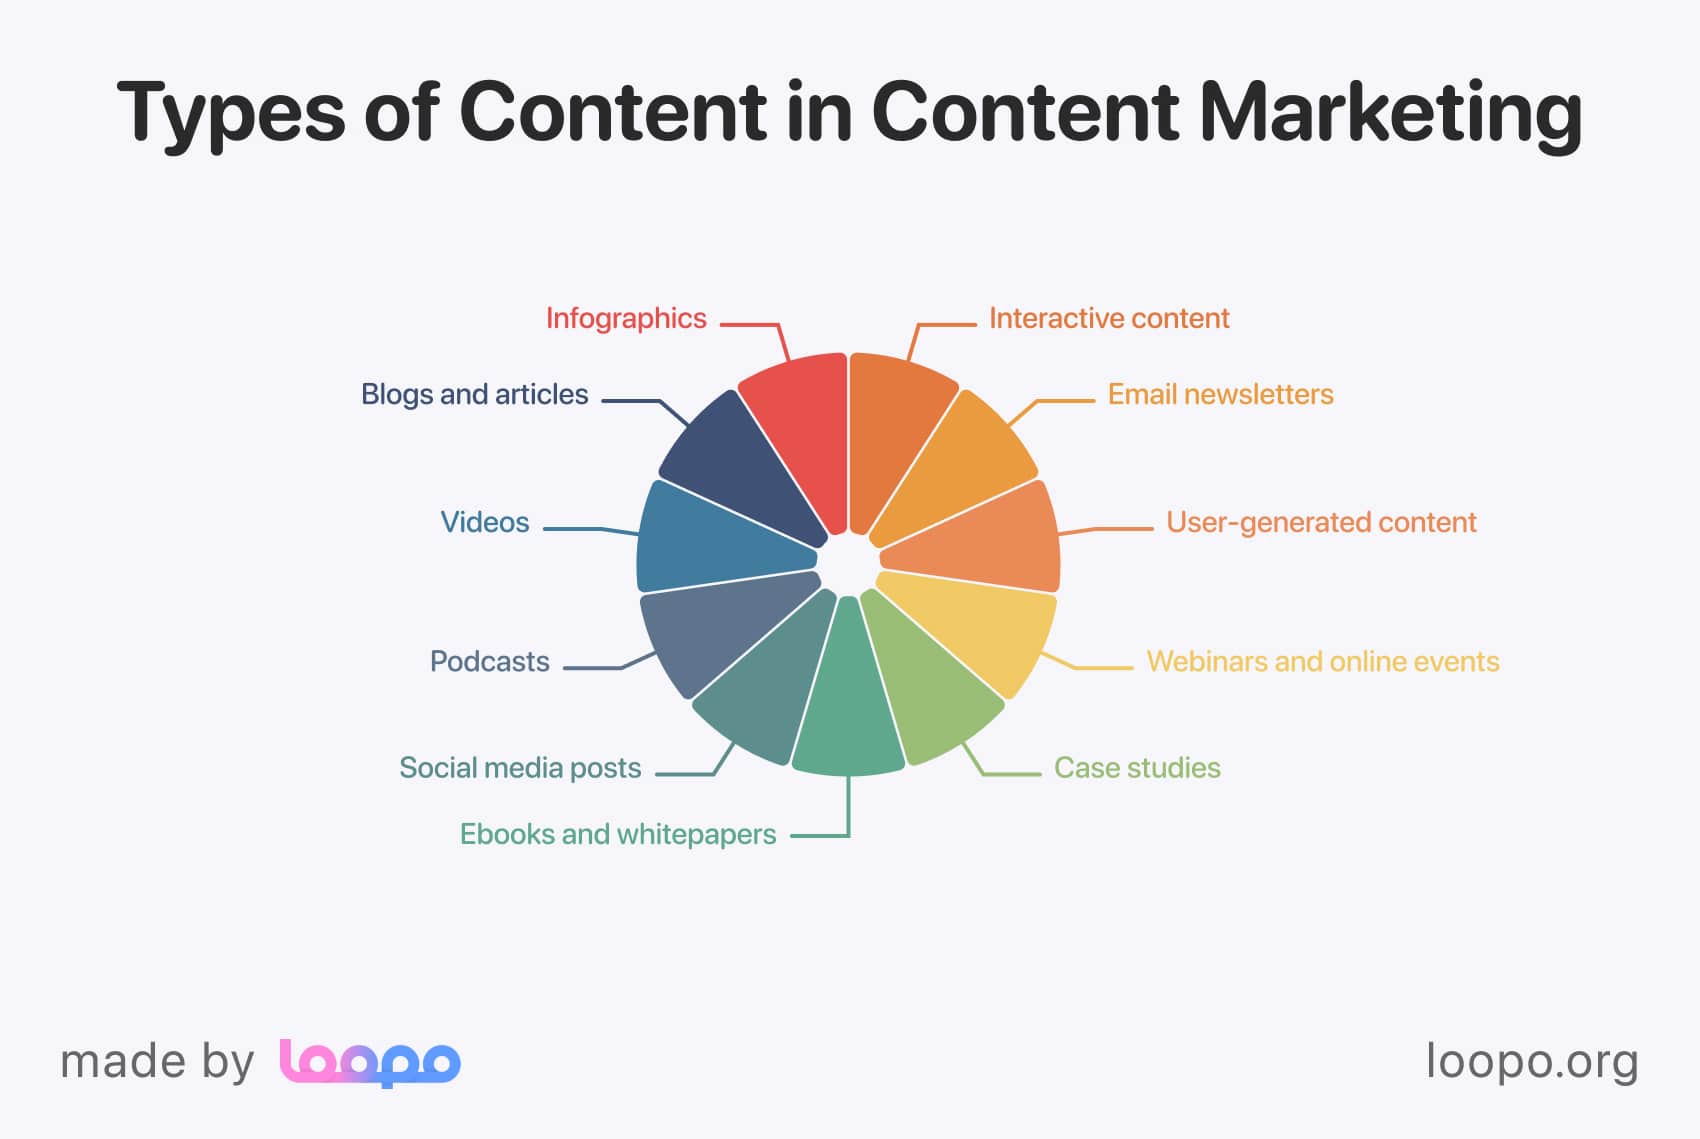 Main aspects of content marketing